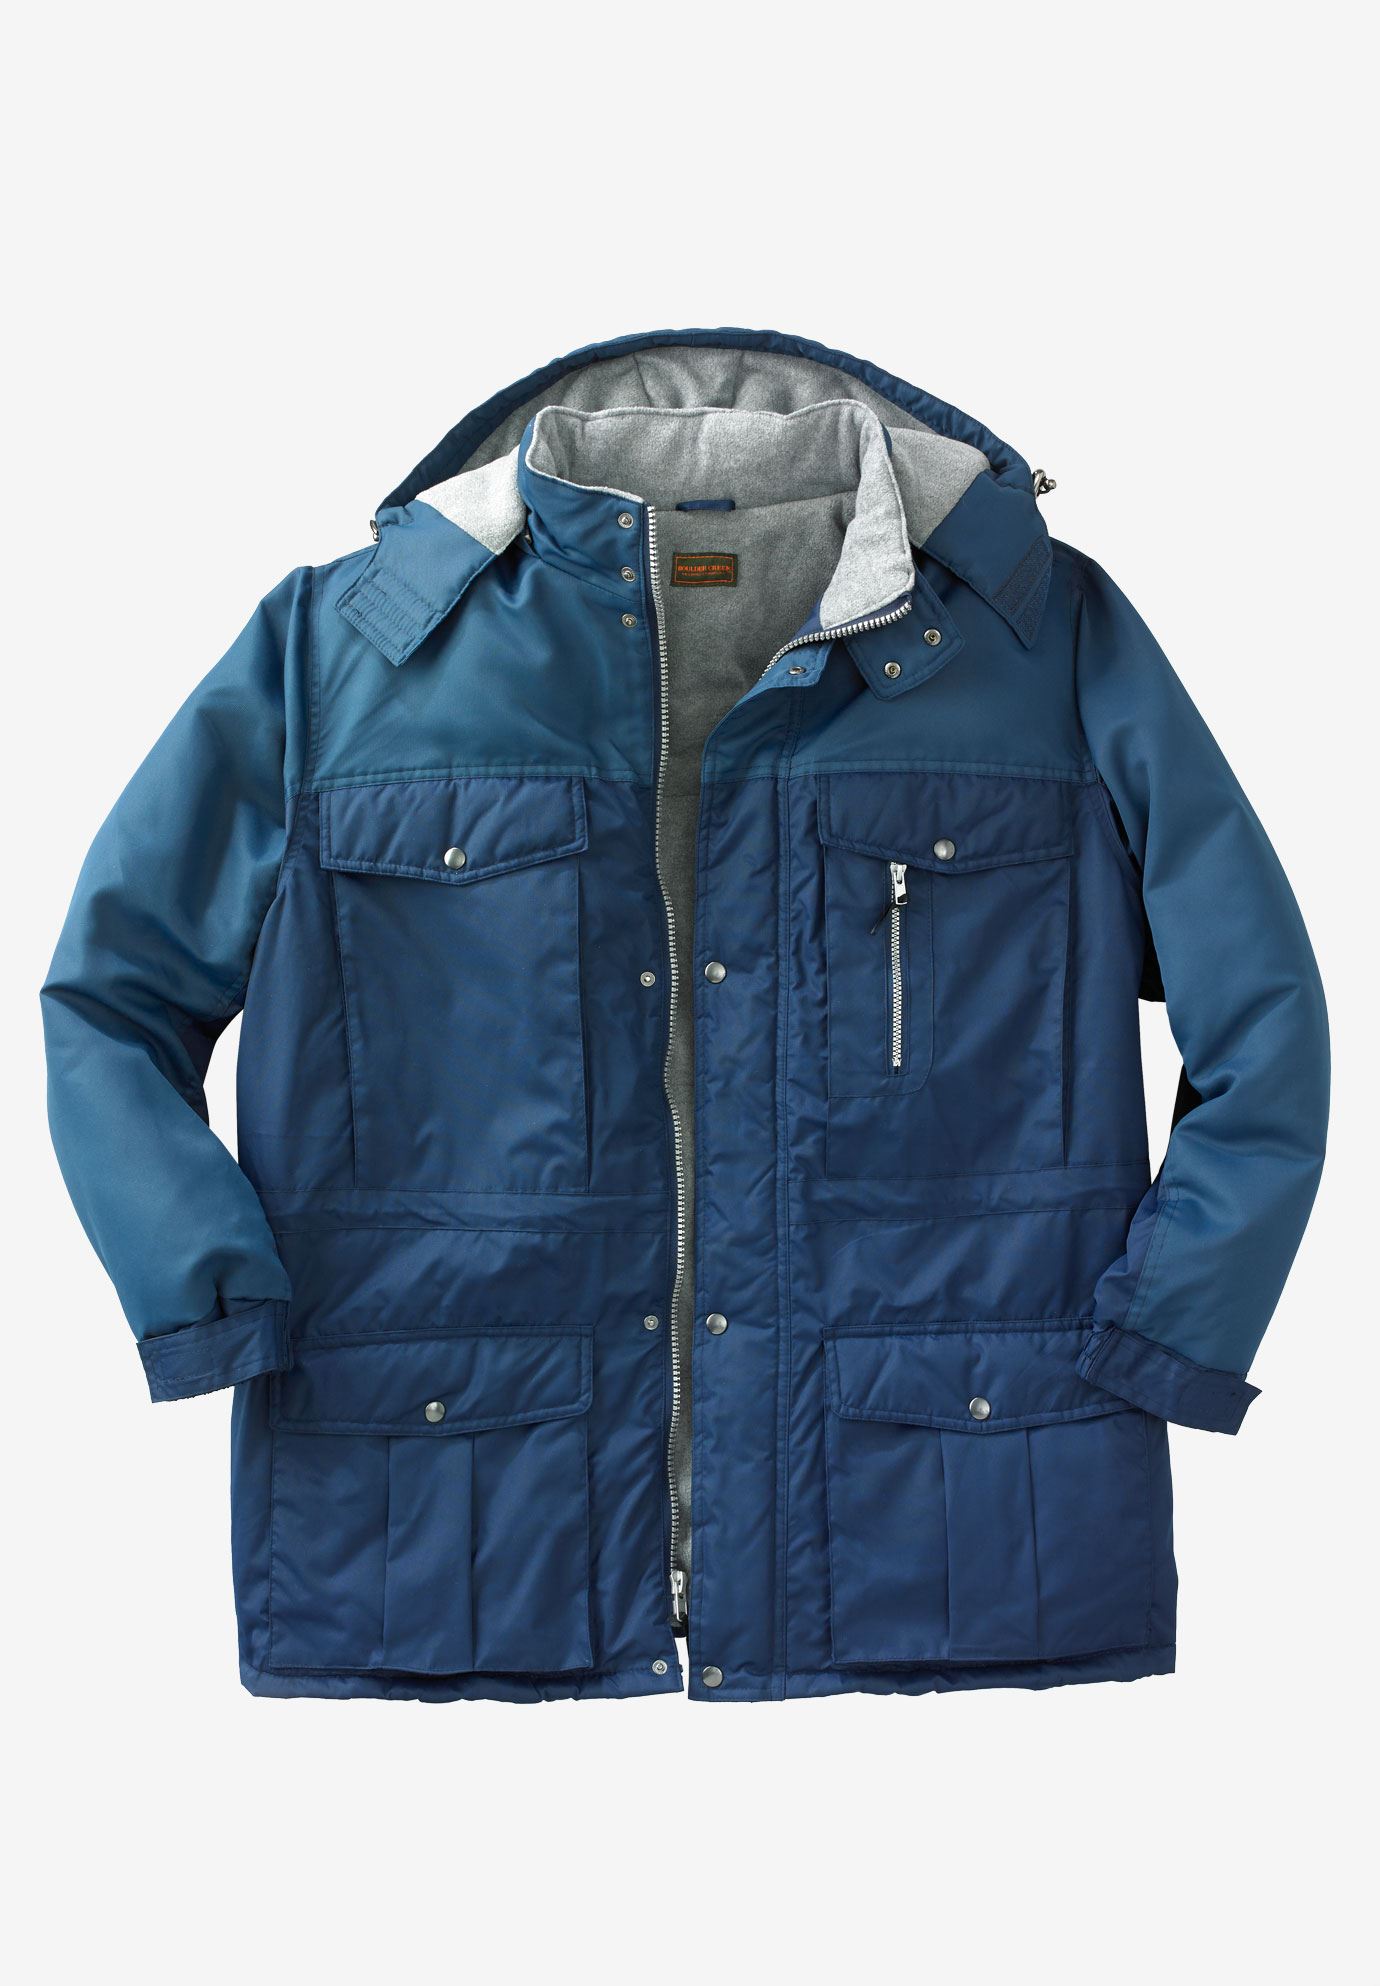 Boulder Creek® Colorblock Hooded Parka| Big and Tall Outerwear | Full ...